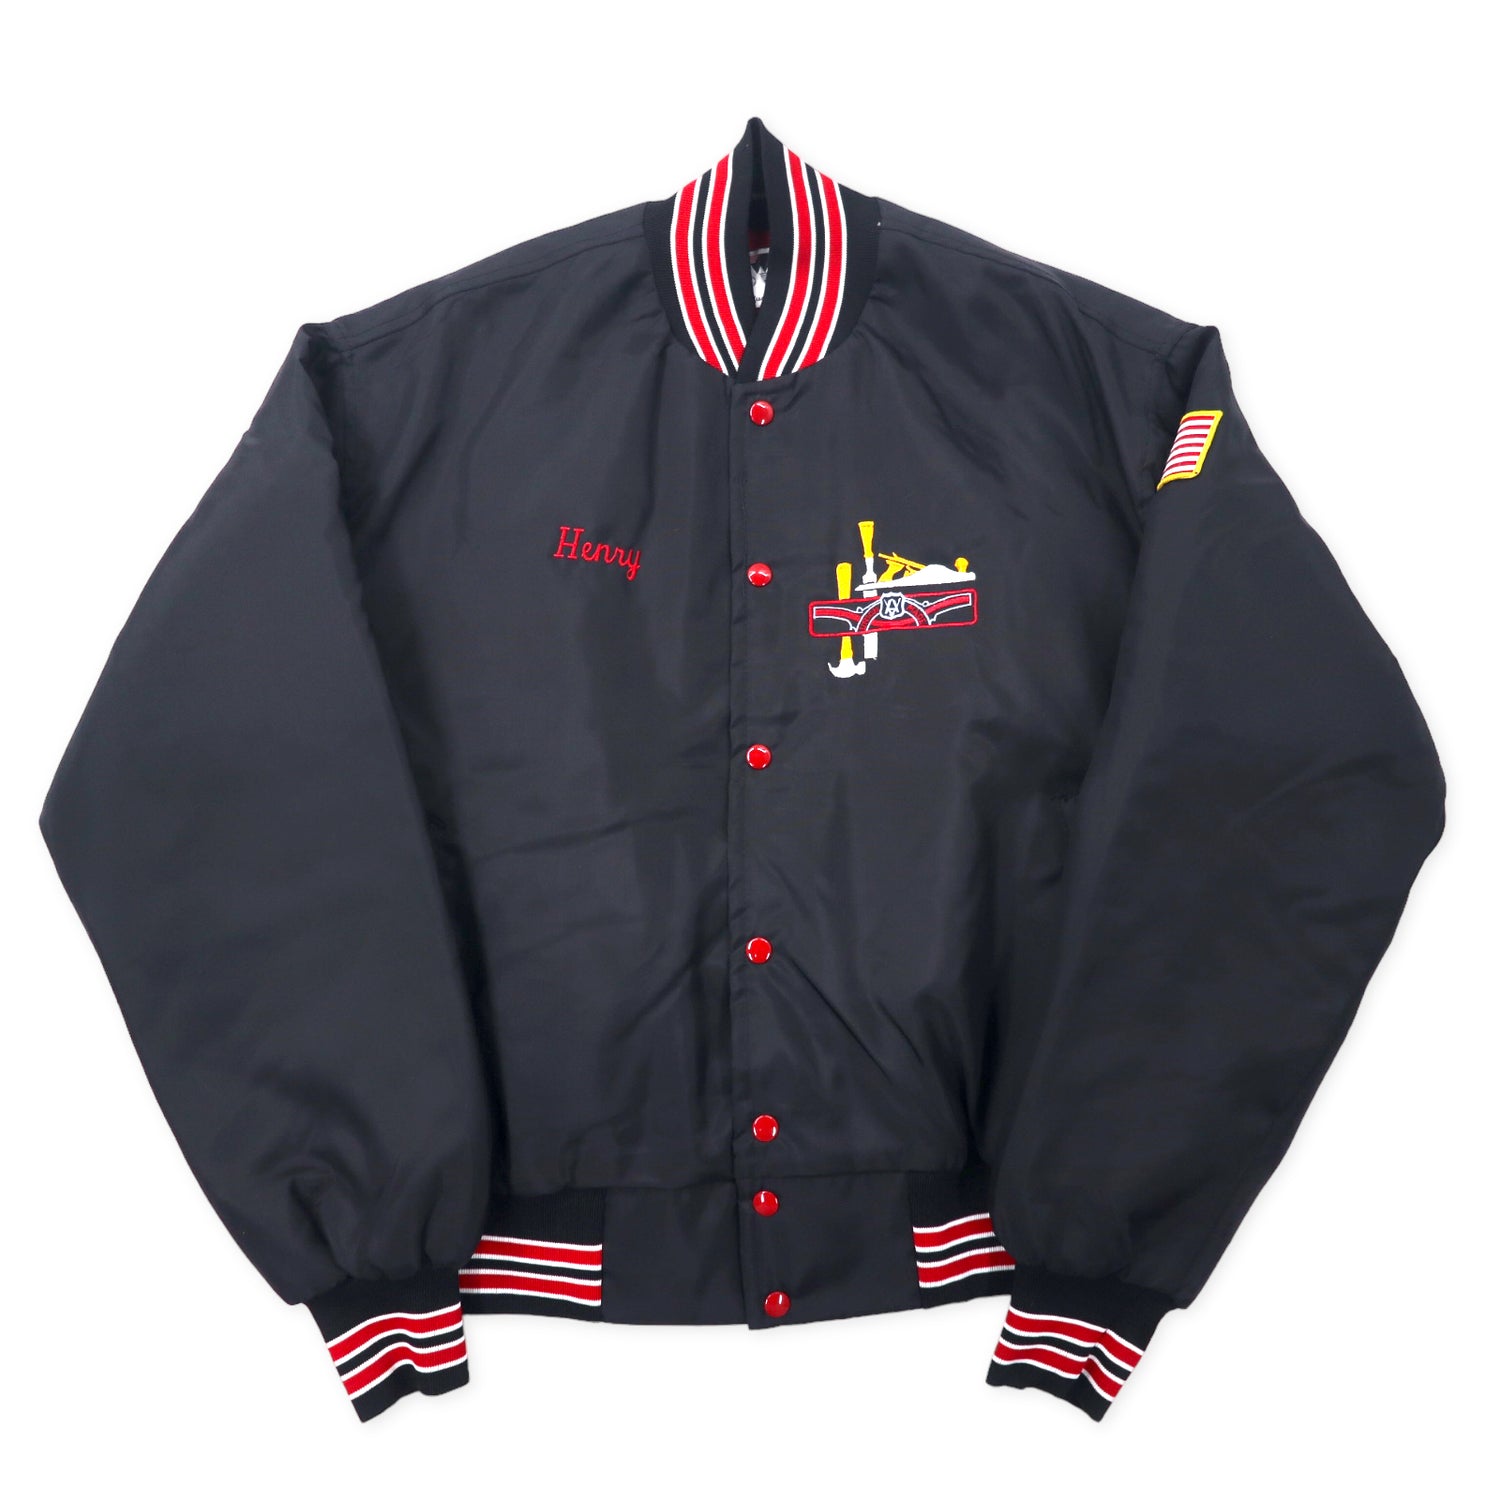 WEST WIND BY BUCCANEER MFG. USA MADE 90's Varsity Jacket XL Black Nylon  Quilted Liner Local 1160 Back embroidery